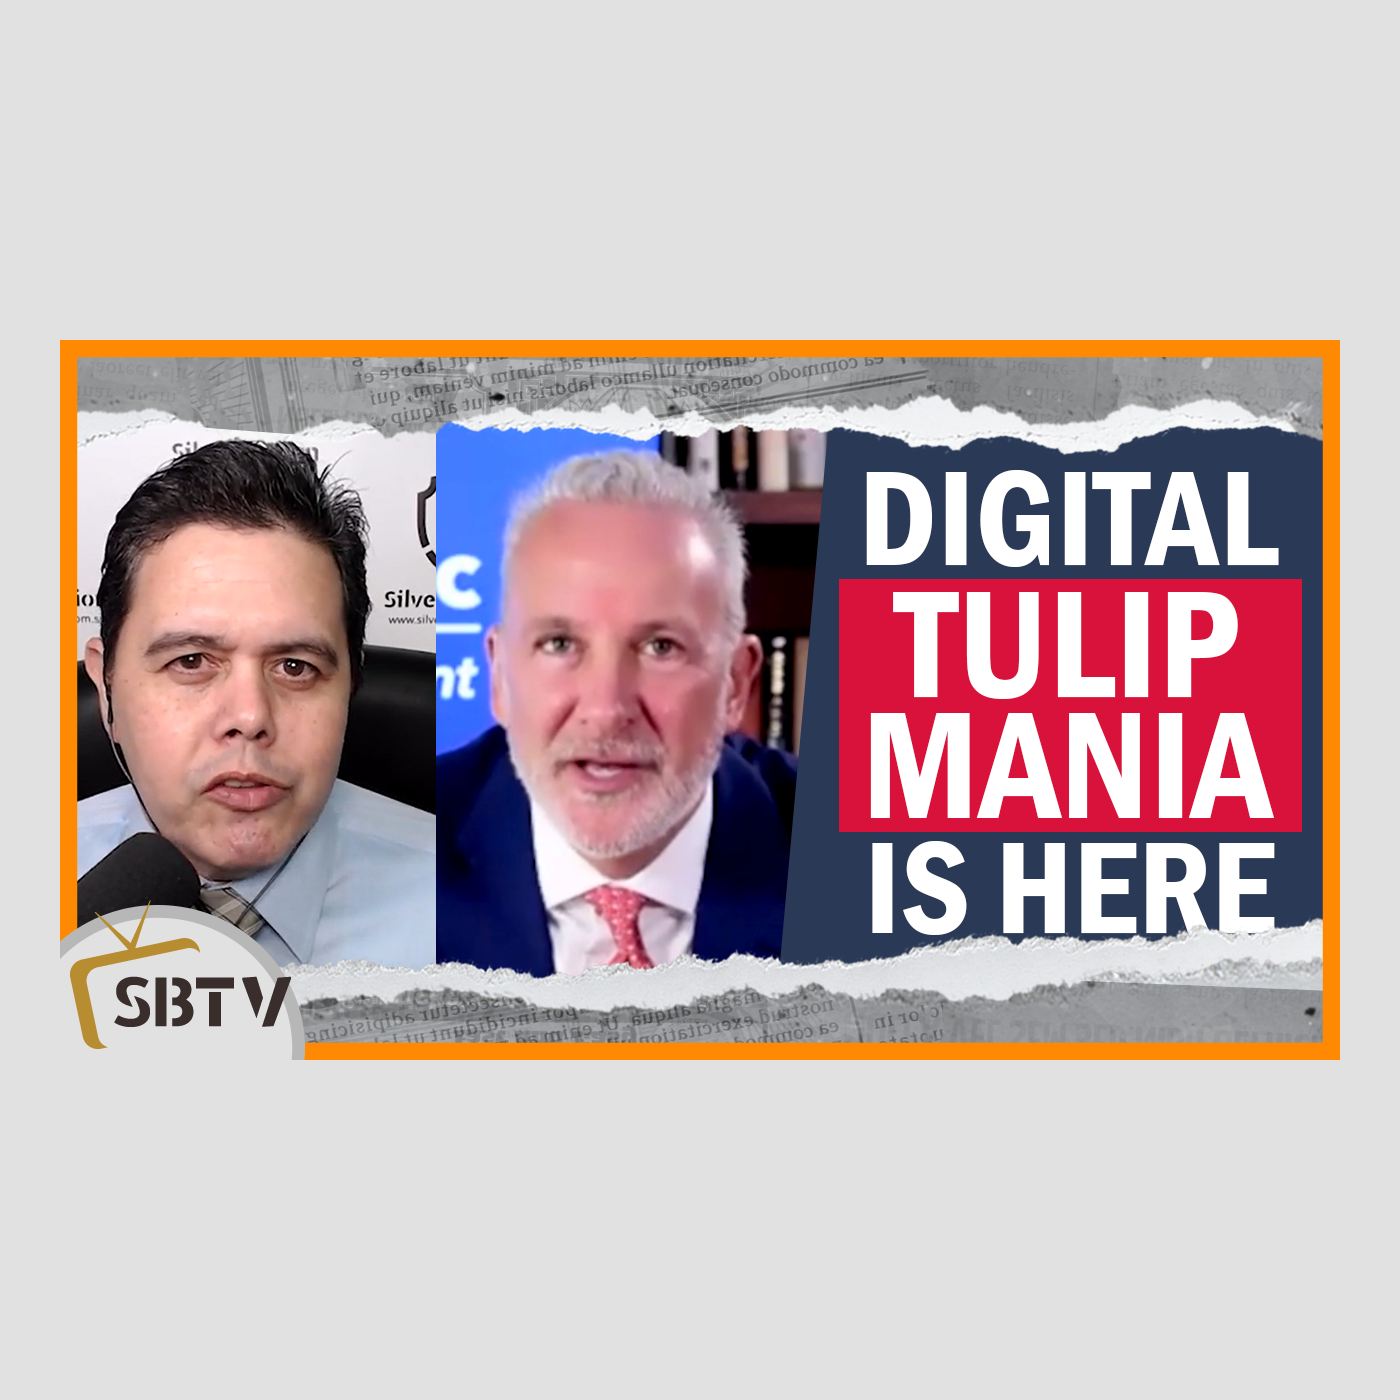 153 Peter Schiff - Digital Age Tulip Mania Is Here Seeking Fools to Buy 'Greater Fool' Assets